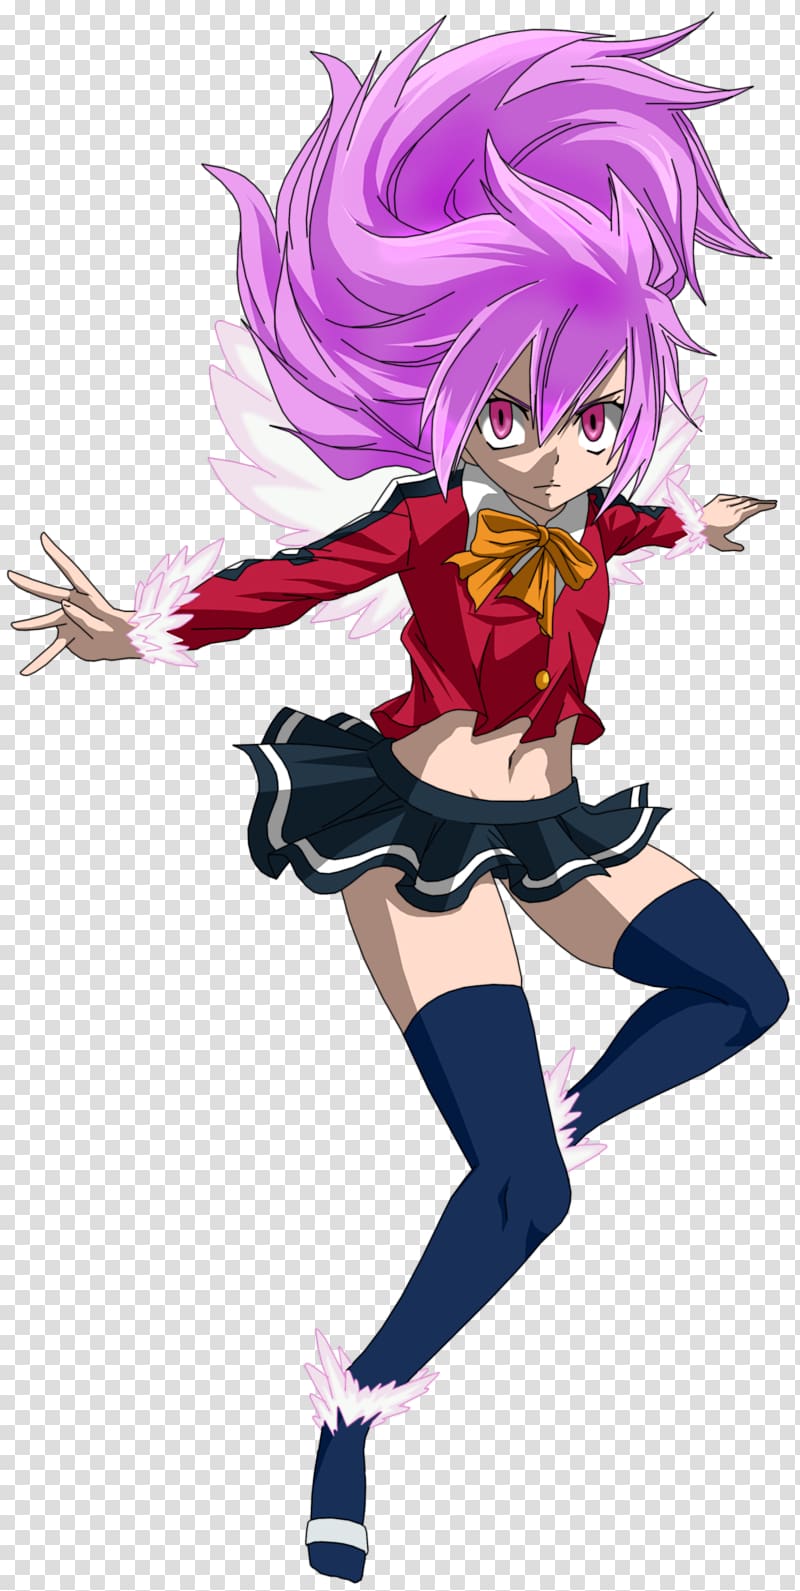 Dragon Force Wendy Marvell Natsu Dragneel Fairy Tail, fairy tail transparent background PNG clipart